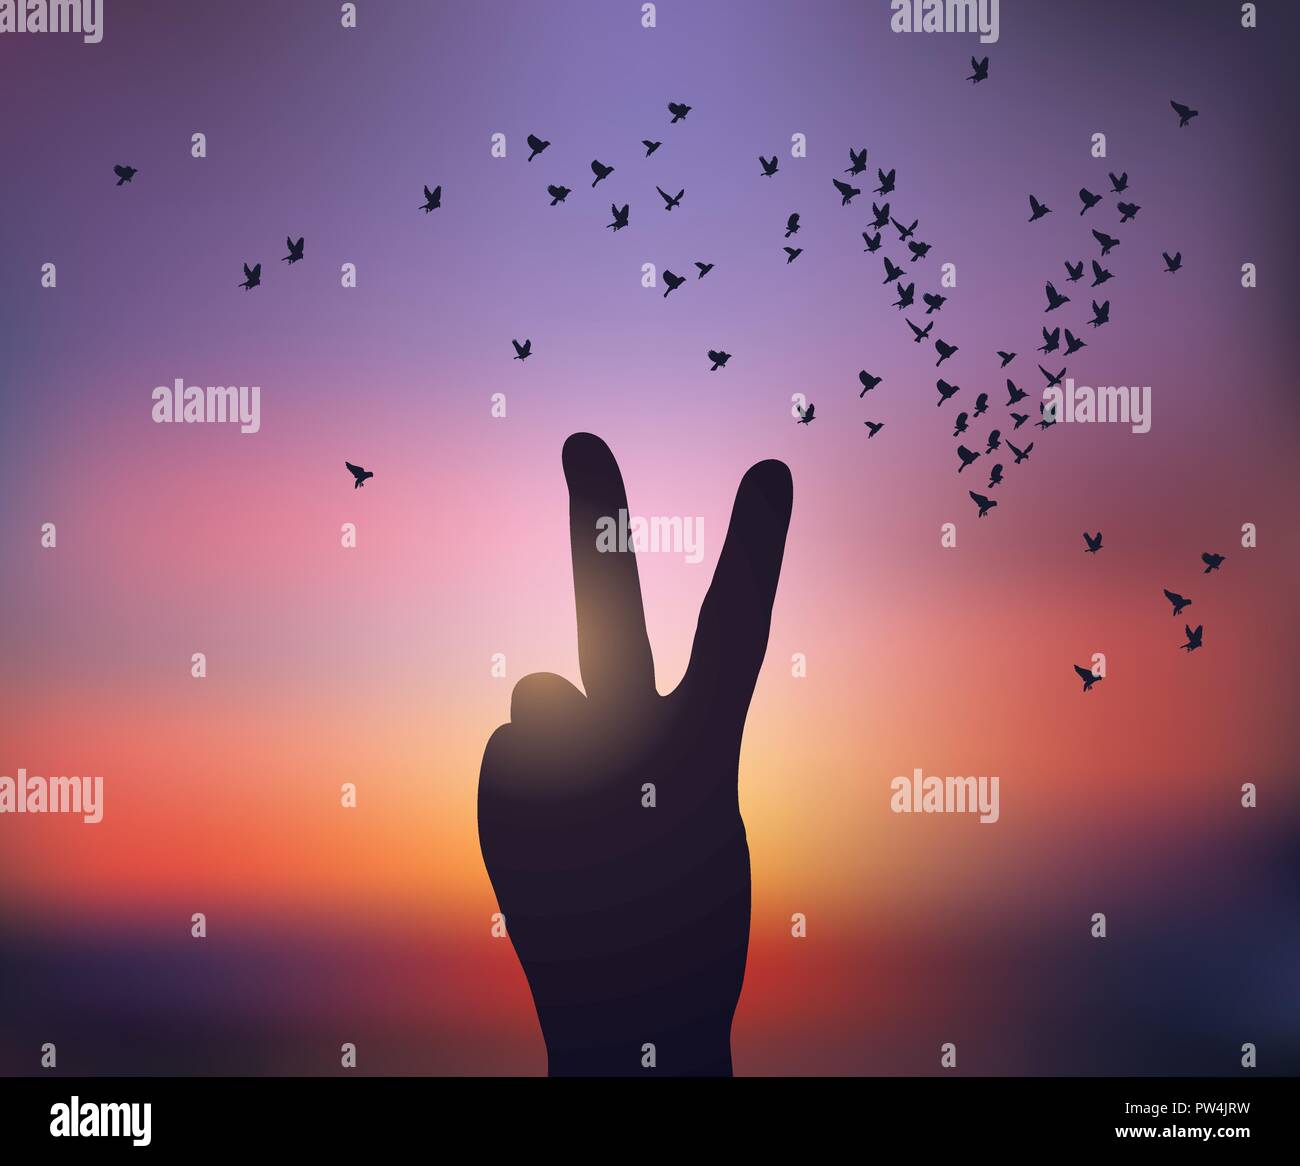 Hand victory symbol silhouette birds in sunset sky Stock Vector